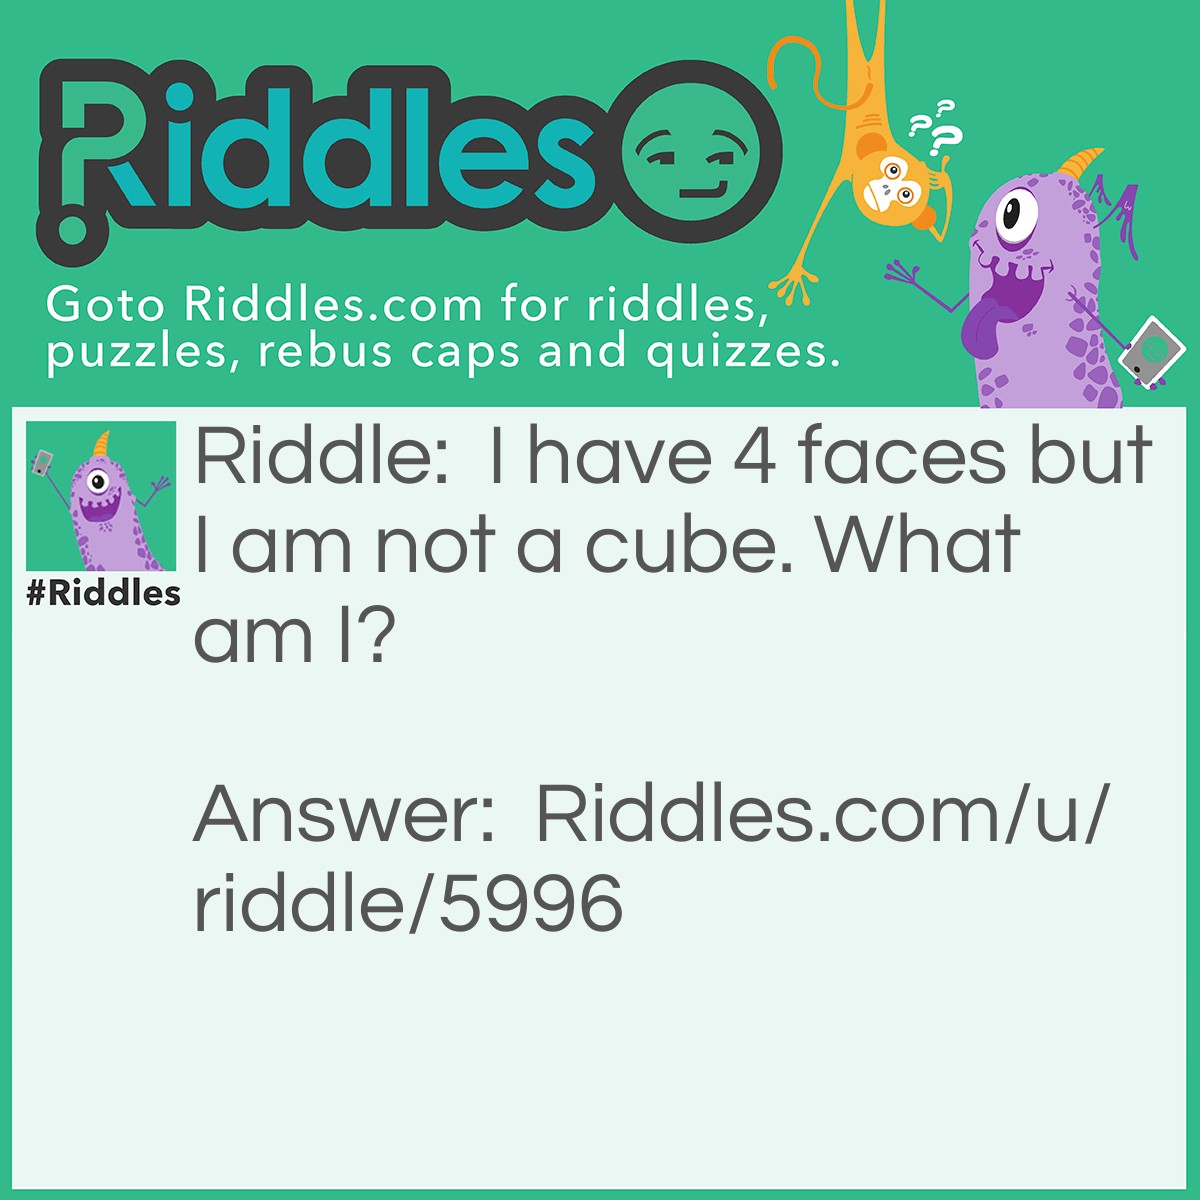 Riddle: I have 4 faces but I am not a cube. What am I? Answer: I am a rectangle.